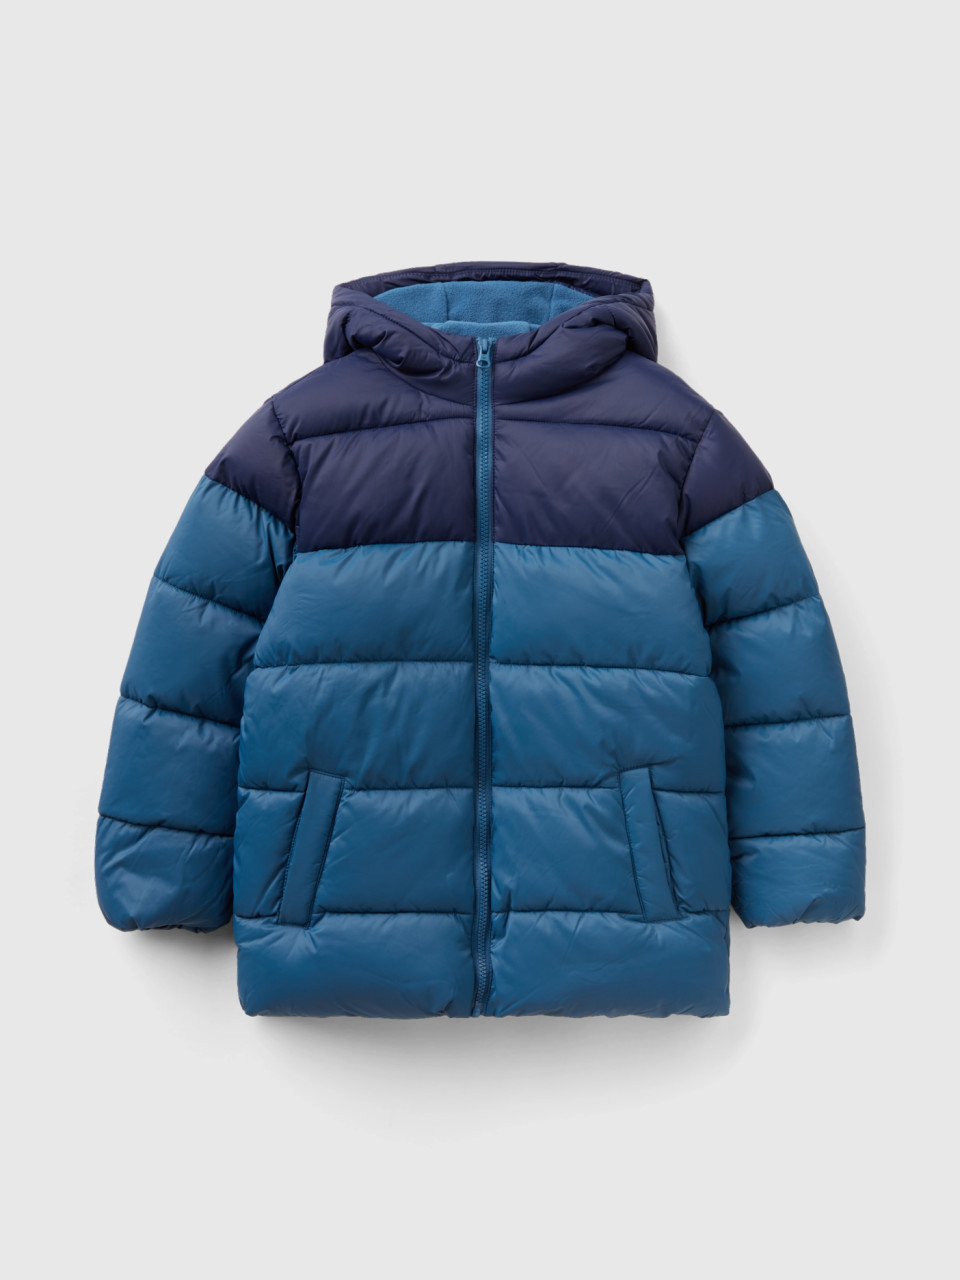 Benetton, Color Block Jacket With Hood, Air Force Blue, Kids